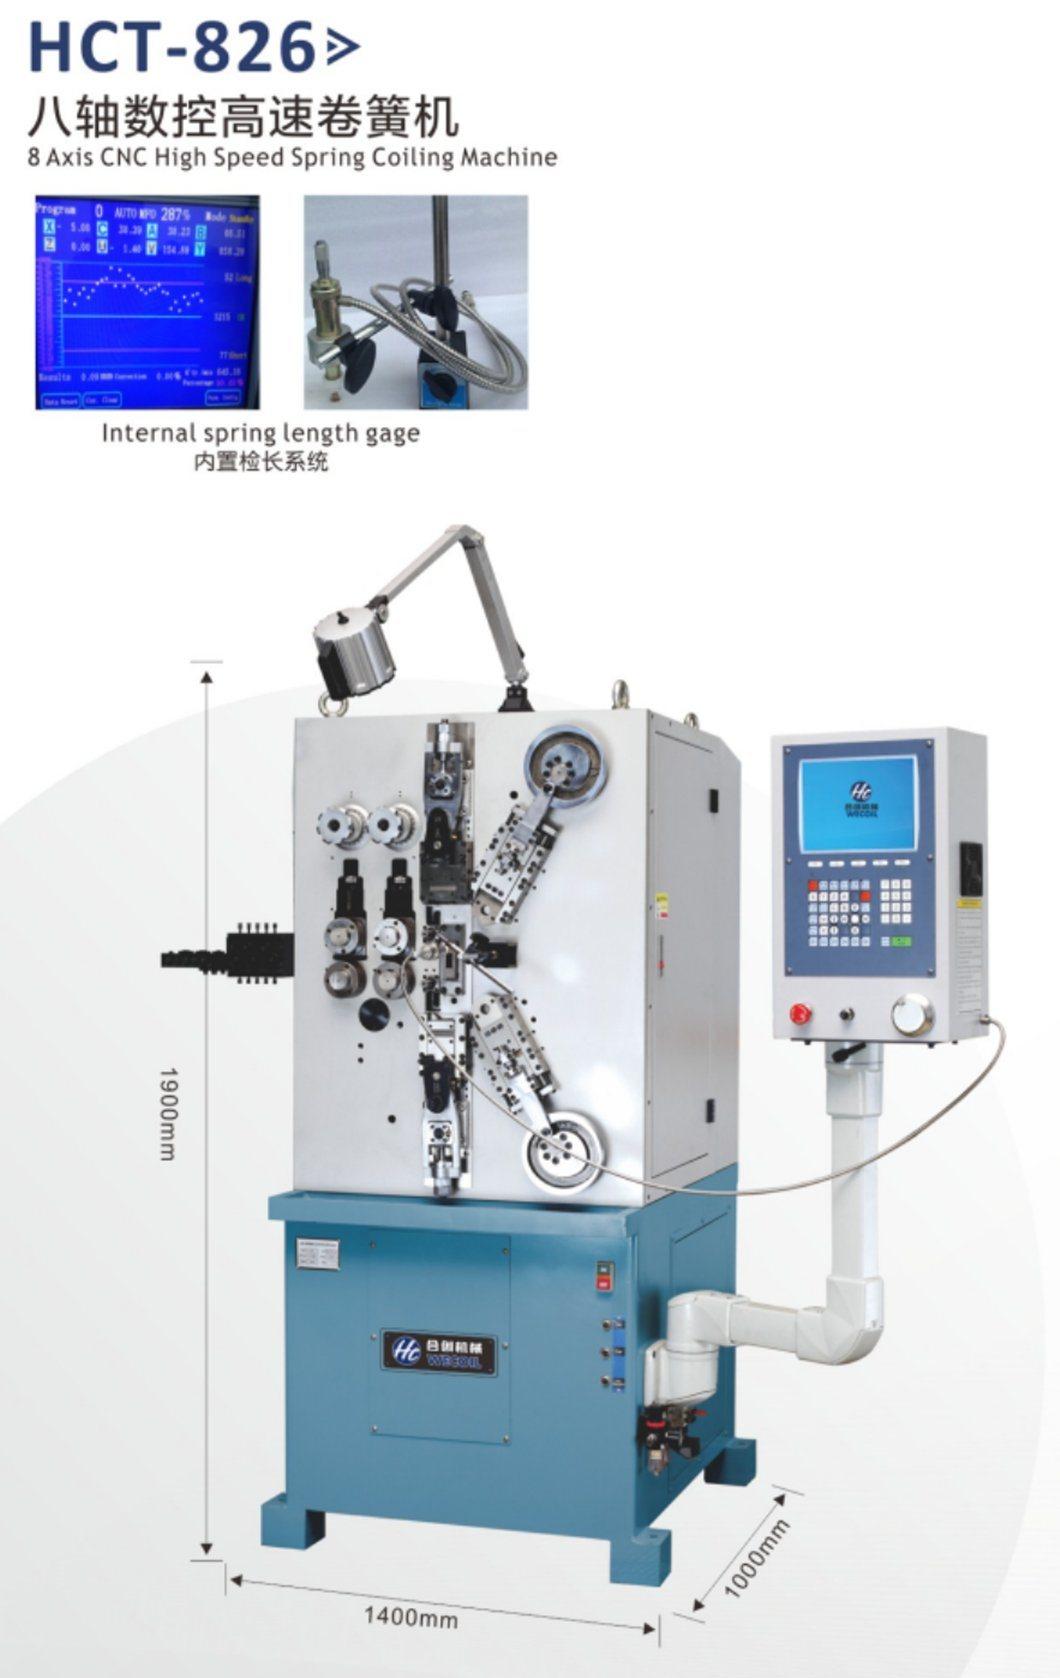 Wecoil-Hct-826 8 Axis CNC Spring Coiling Machine